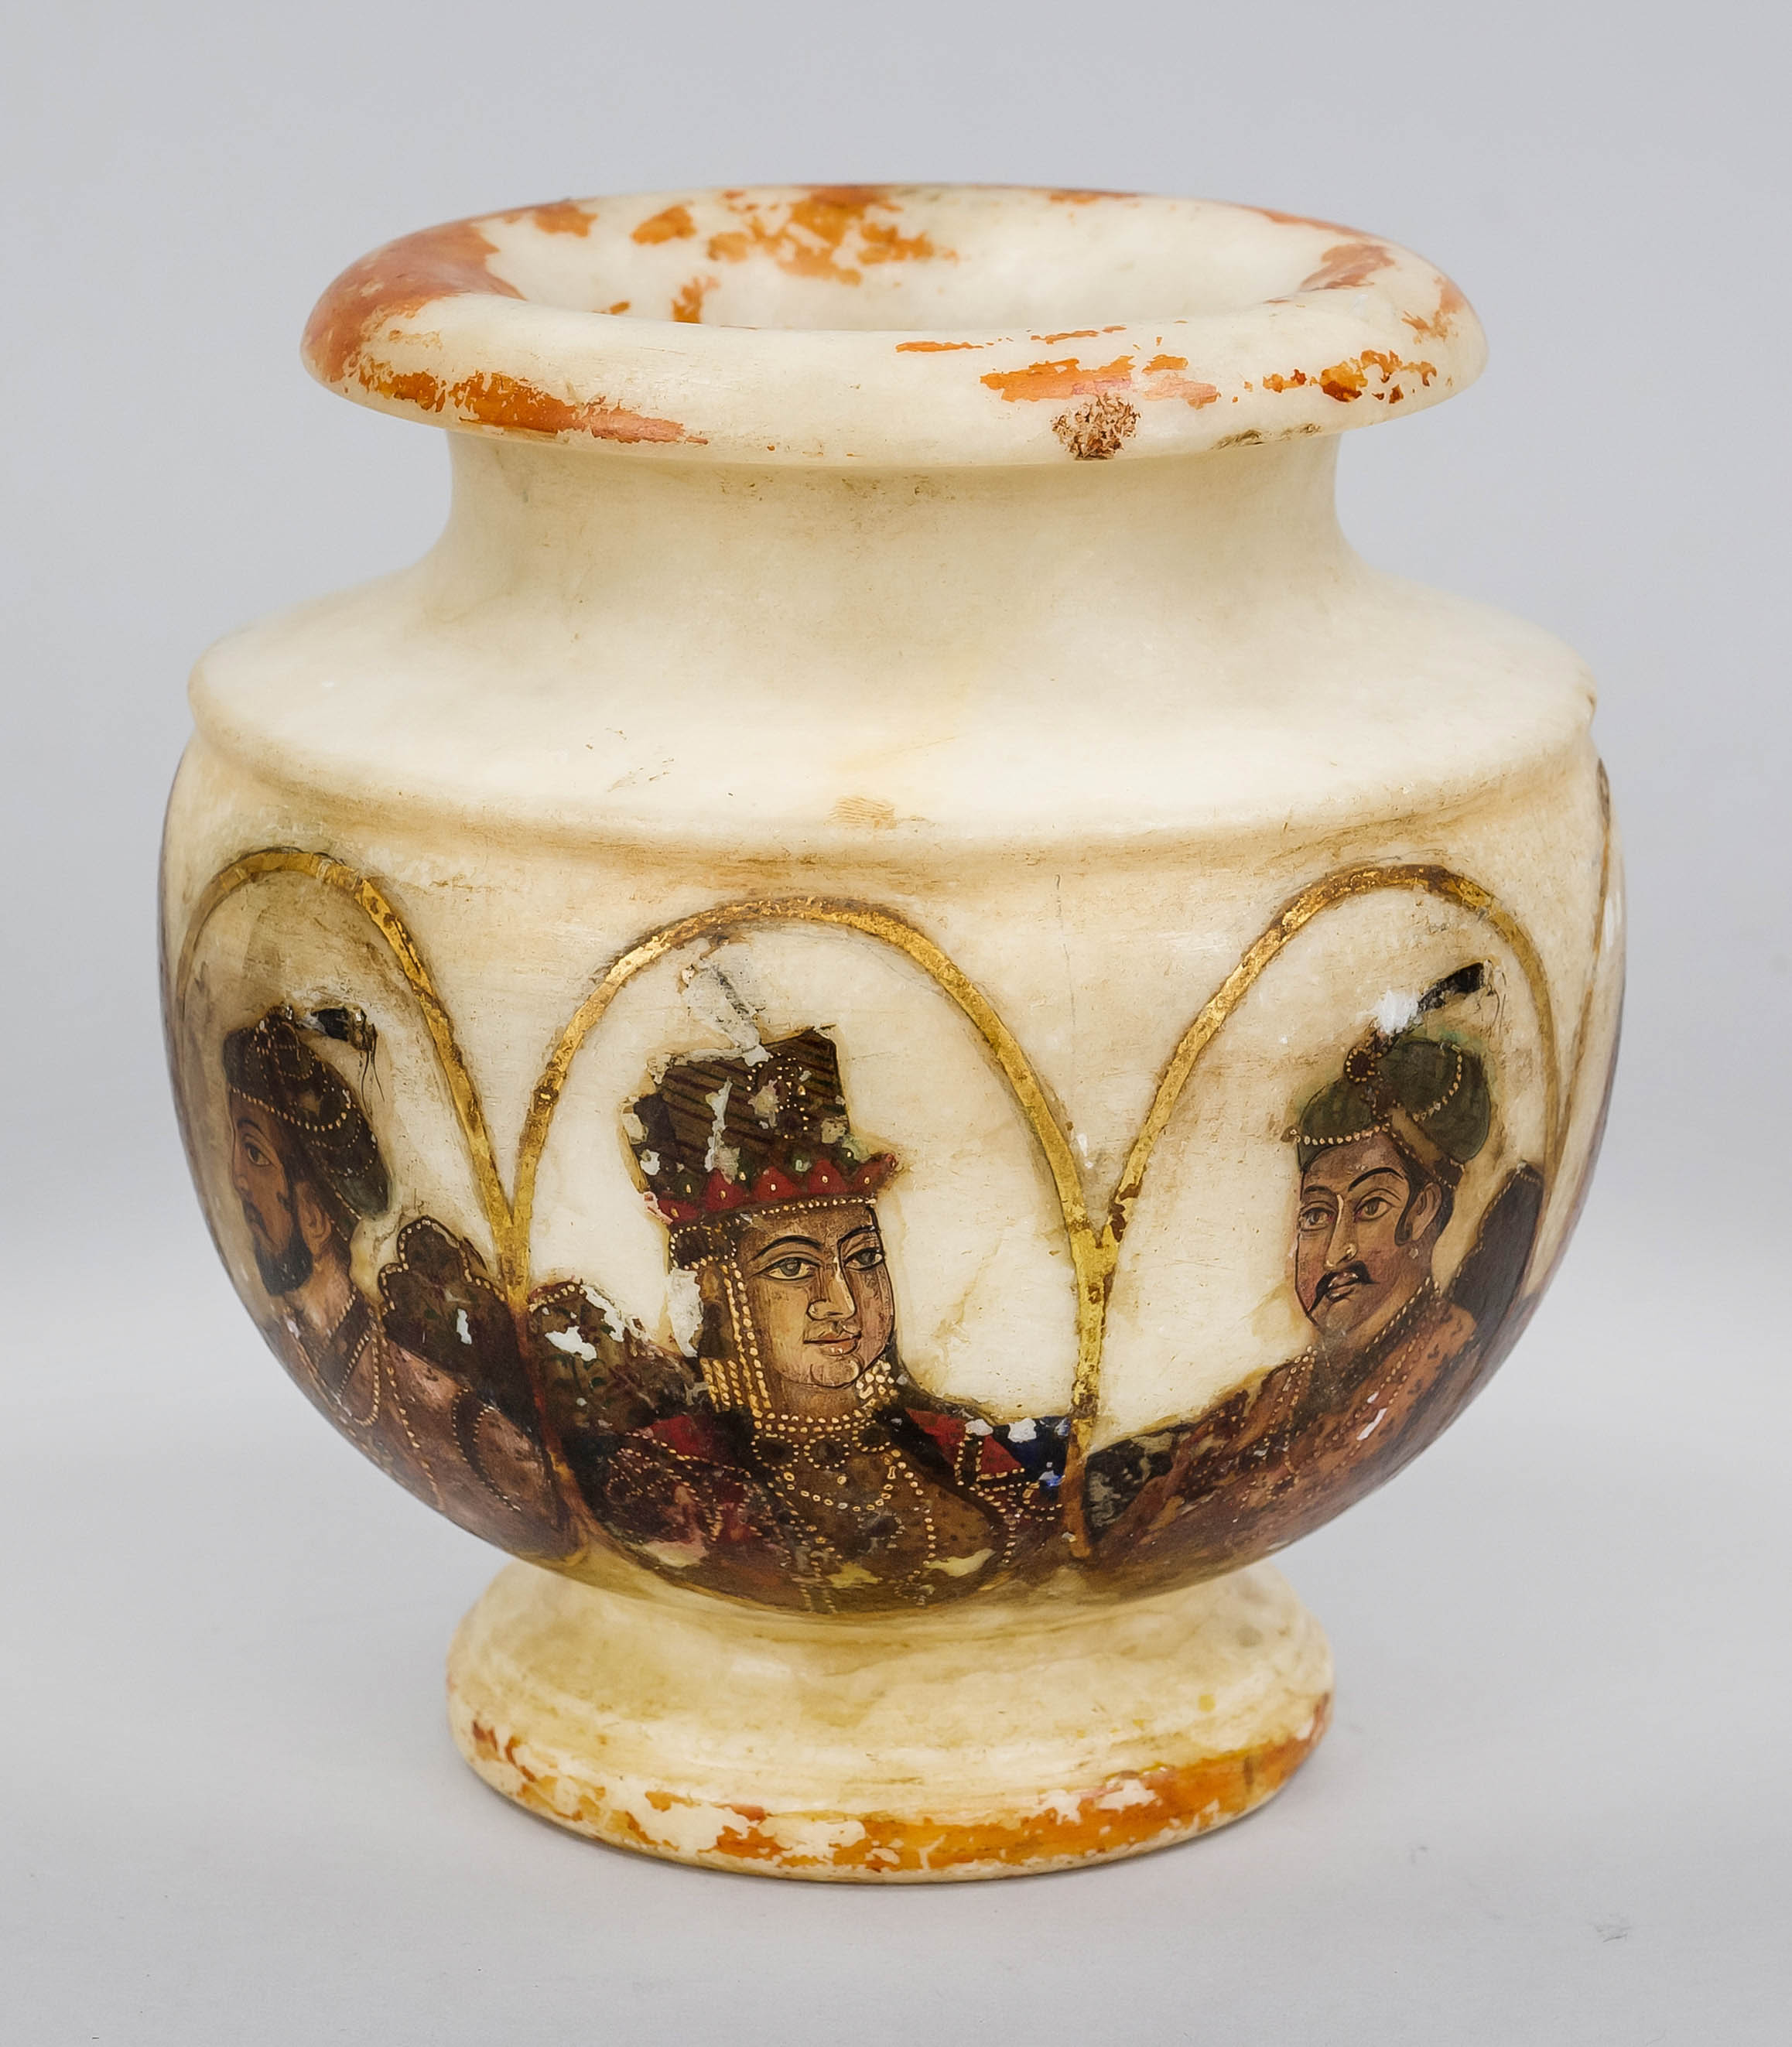 Marble vase, India 19th/20th century, shouldered form with slightly retracted neck and bulging lip